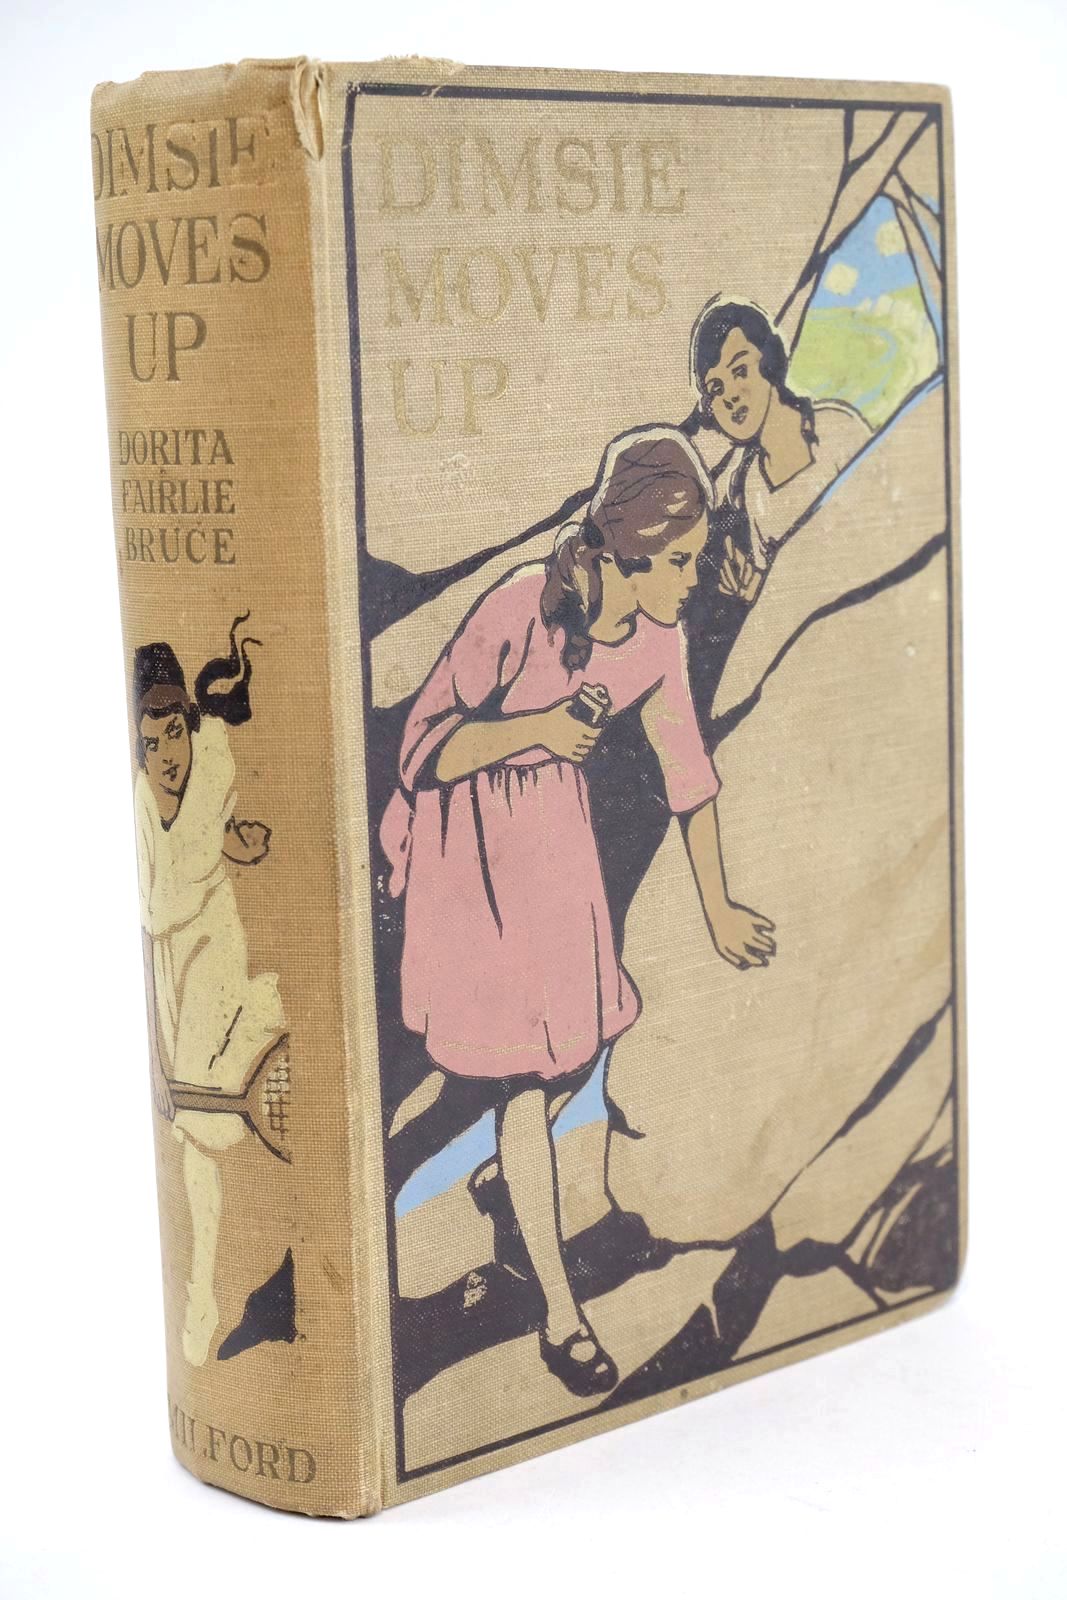 Photo of DIMSIE MOVES UP written by Bruce, Dorita Fairlie illustrated by Paget, Wal published by Oxford University Press, Humphrey Milford (STOCK CODE: 1325246)  for sale by Stella & Rose's Books